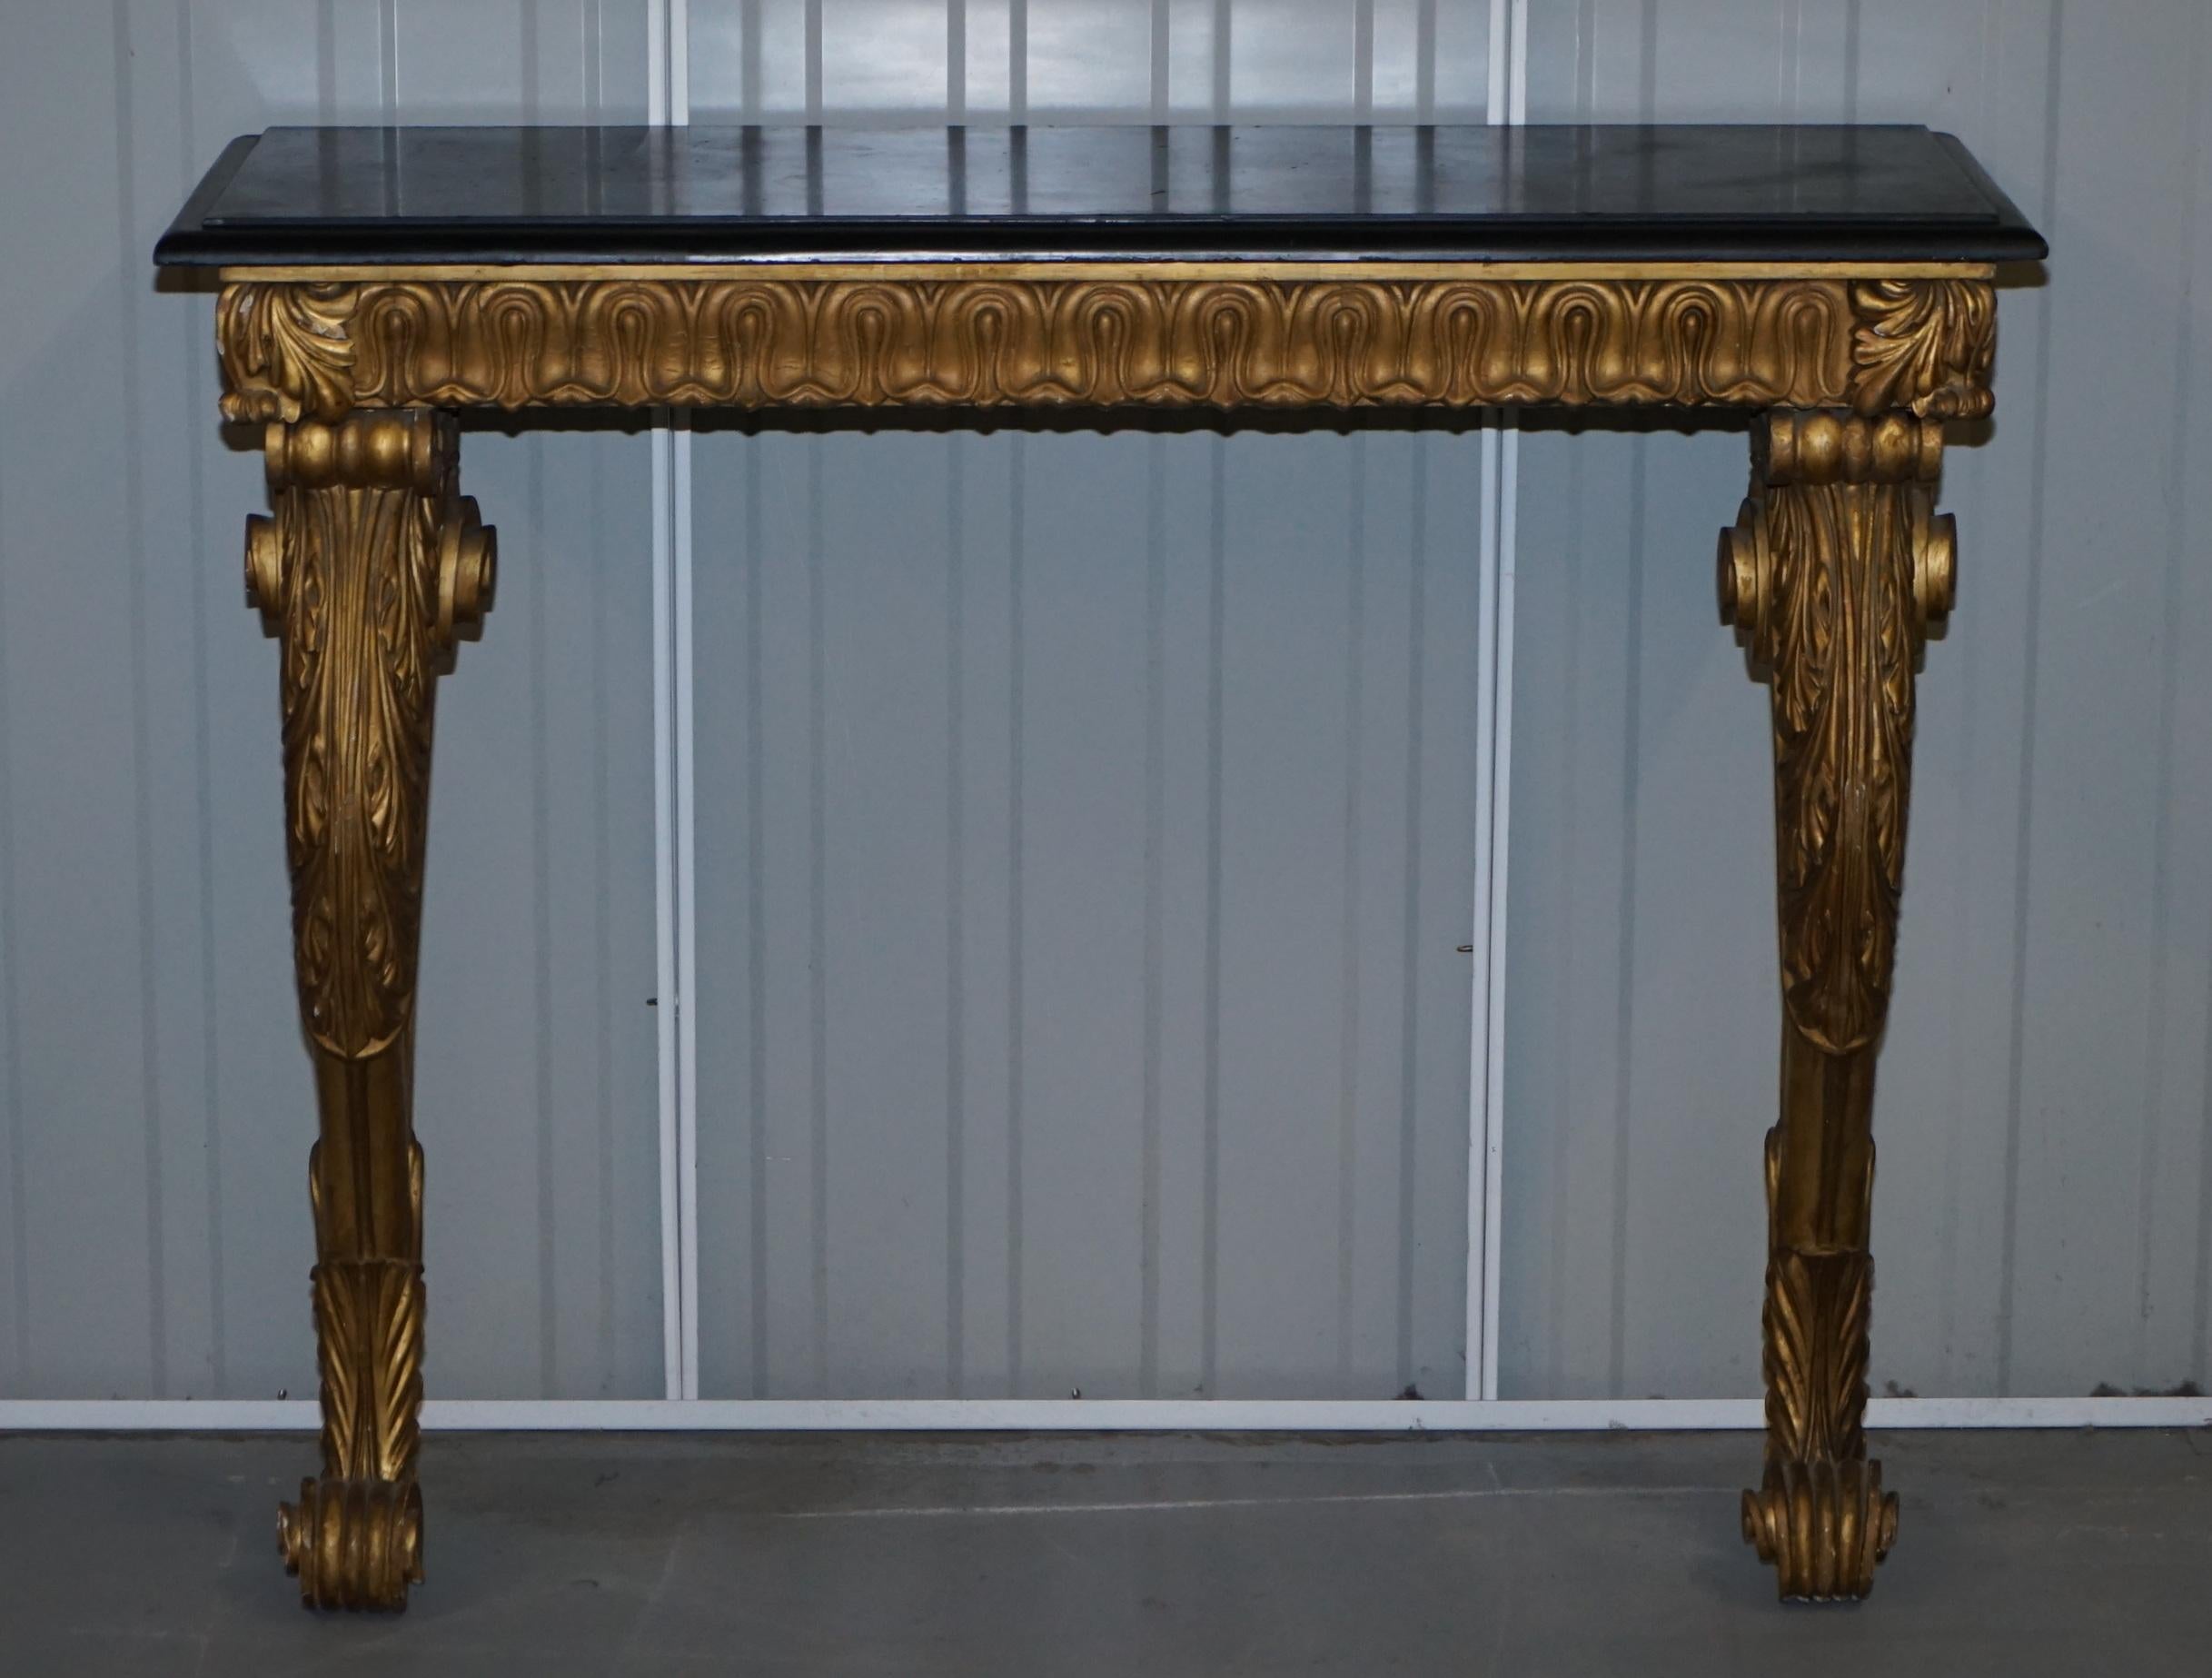 We are delighted to offer for sale this lovely French giltwood with black marble top console table circa 1860 Paris

A very good looking and well made piece with nice gilding to the frame, the marble top is thick, bevelled and nicely cut, its used